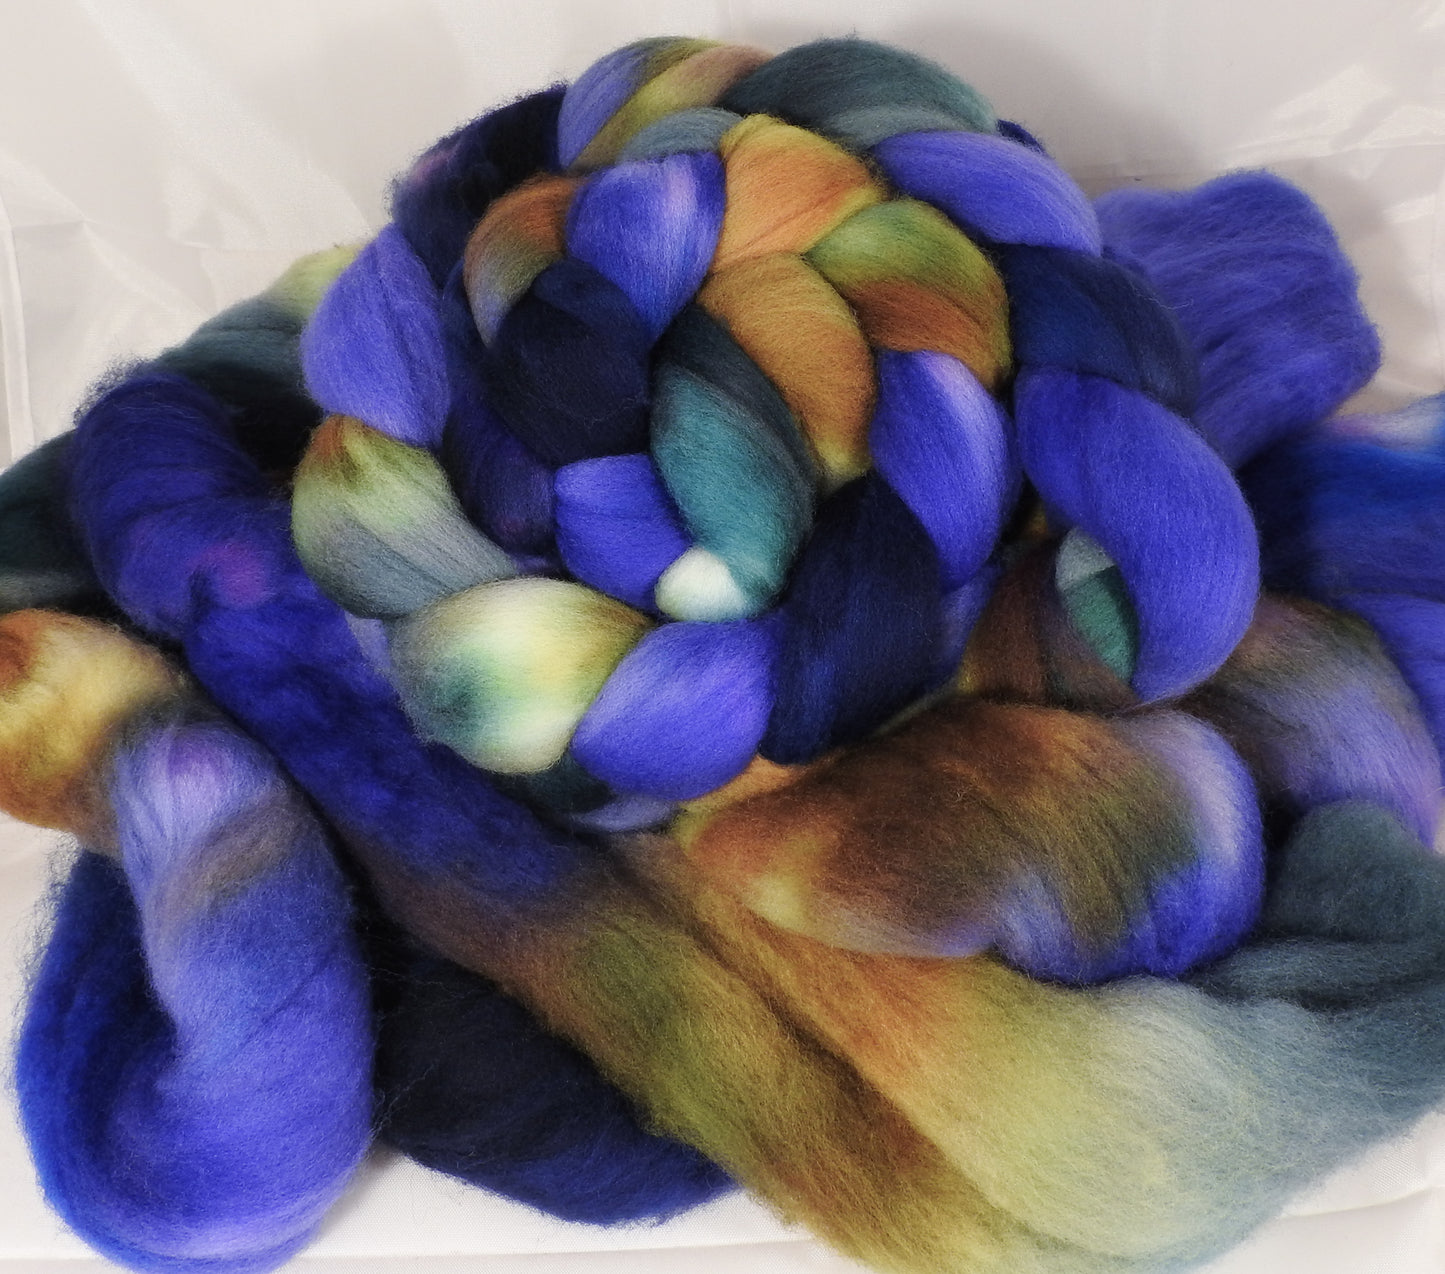 Hand dyed top for spinning -Blue Suede Shoes - (5.3 oz.) Organic polwarth - Inglenook Fibers